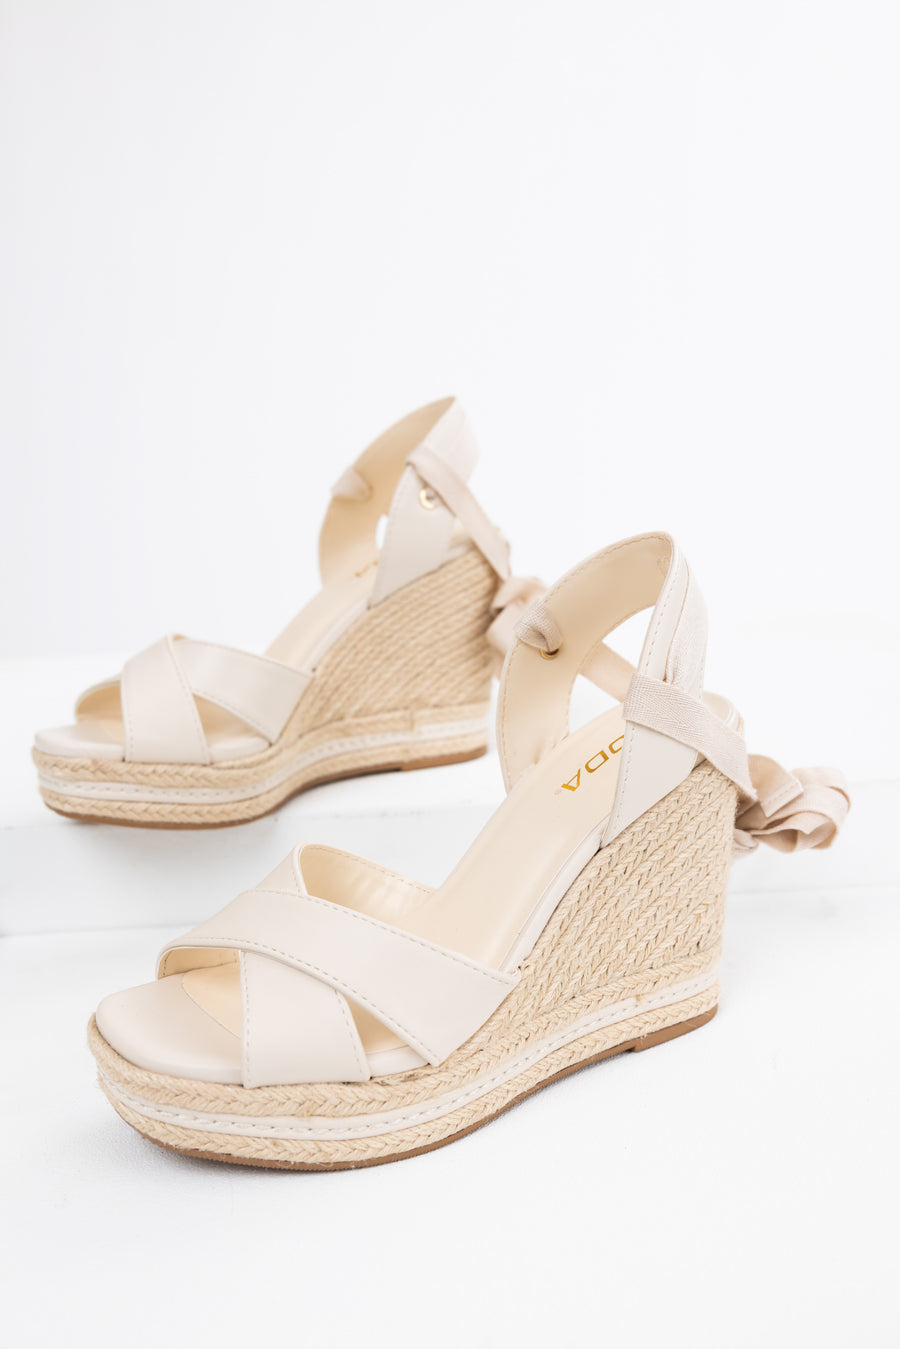 Vanilla Cross Strap Lace Up Espadrille Wedges